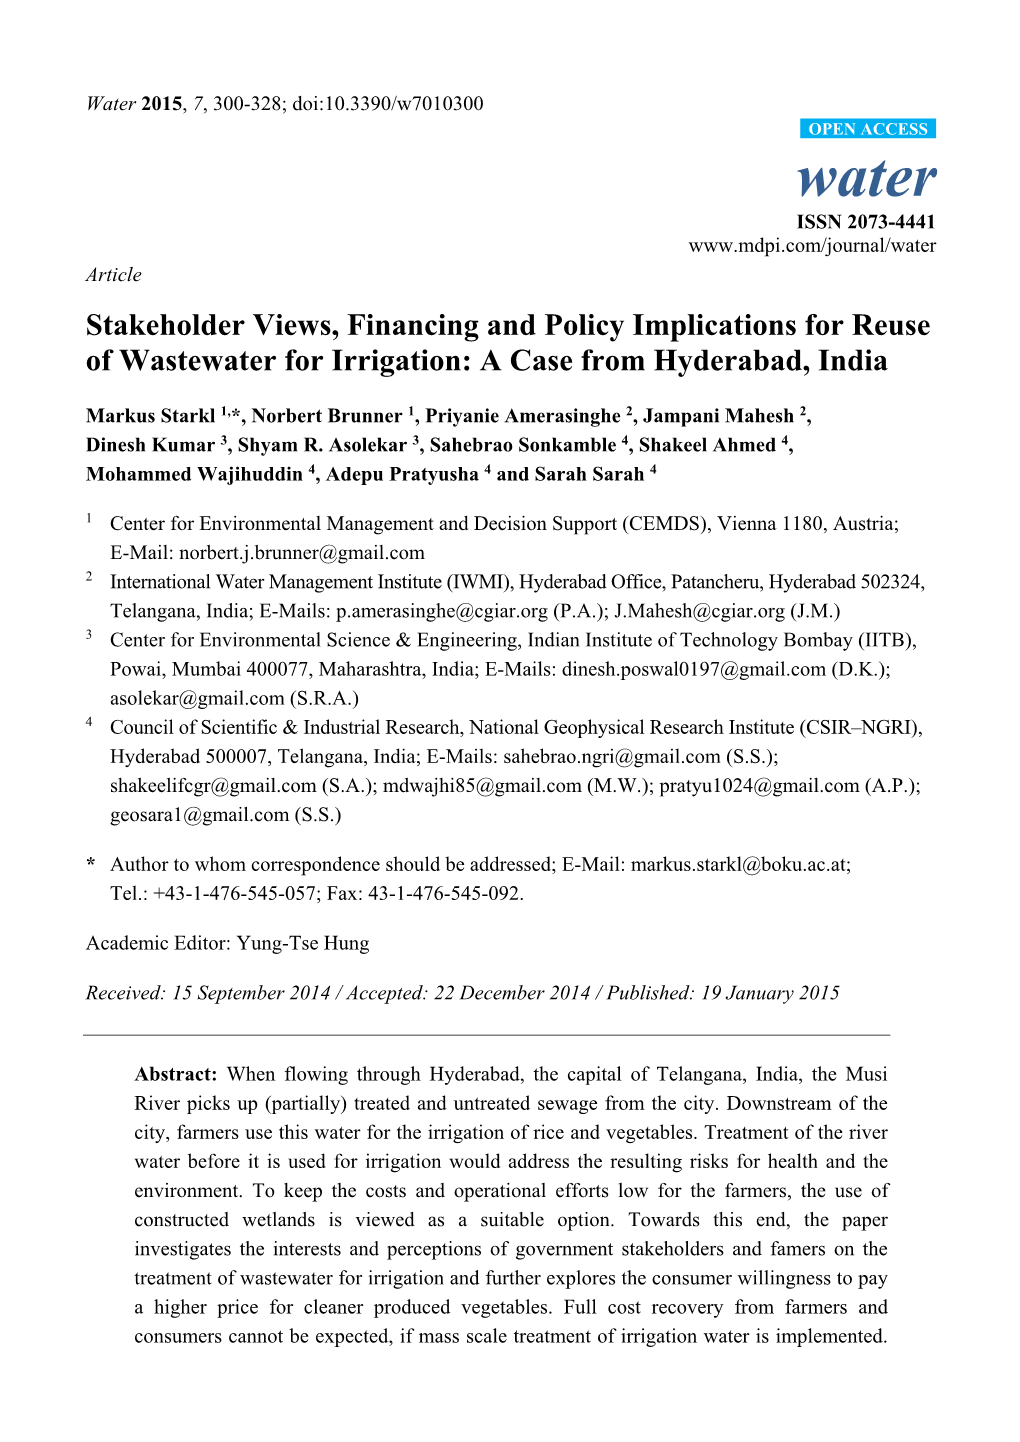 Stakeholder Views, Financing and Policy Implications for Reuse of Wastewater for Irrigation: a Case from Hyderabad, India